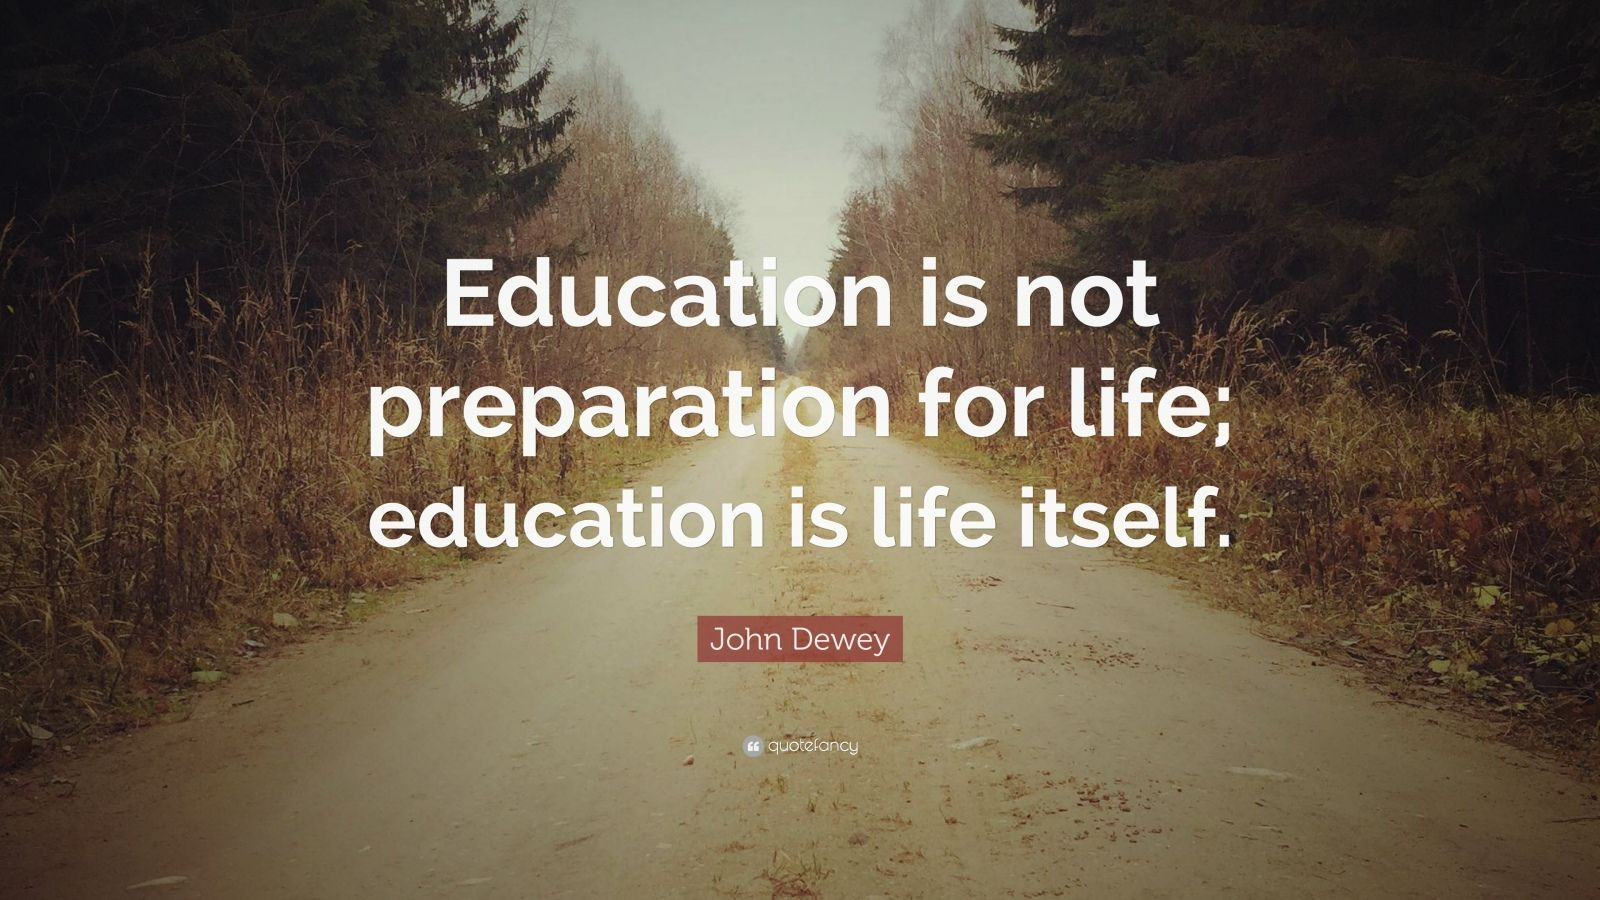 John Dewey Quotes On Education
 John Dewey Quote “Education is not preparation for life